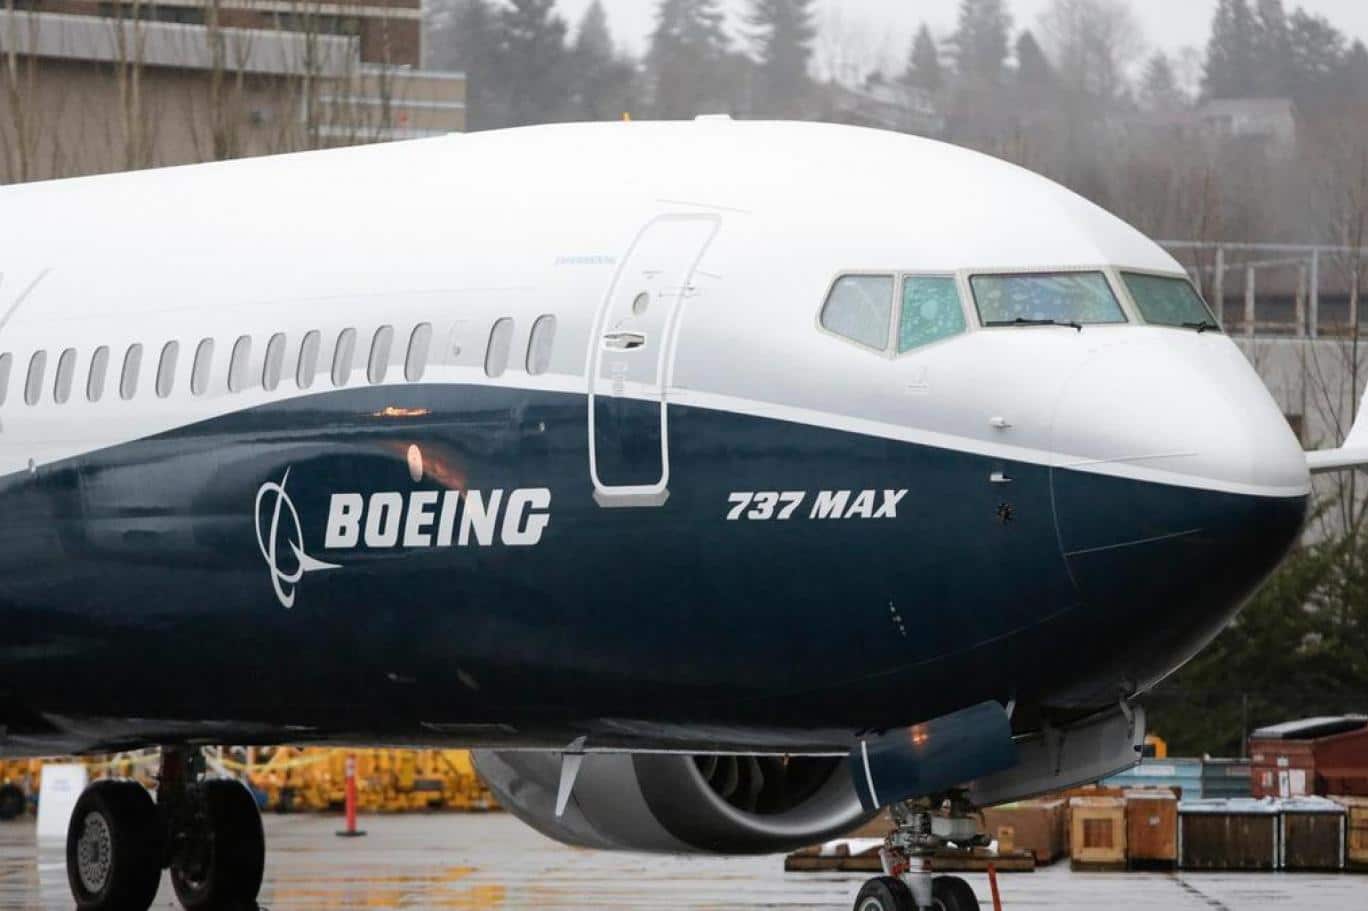 Boeing 737 MAX aircraft had a mechanical engine issue during a flight from Arizona to Montreal, Canada. The plane was forced to unscheduled landing